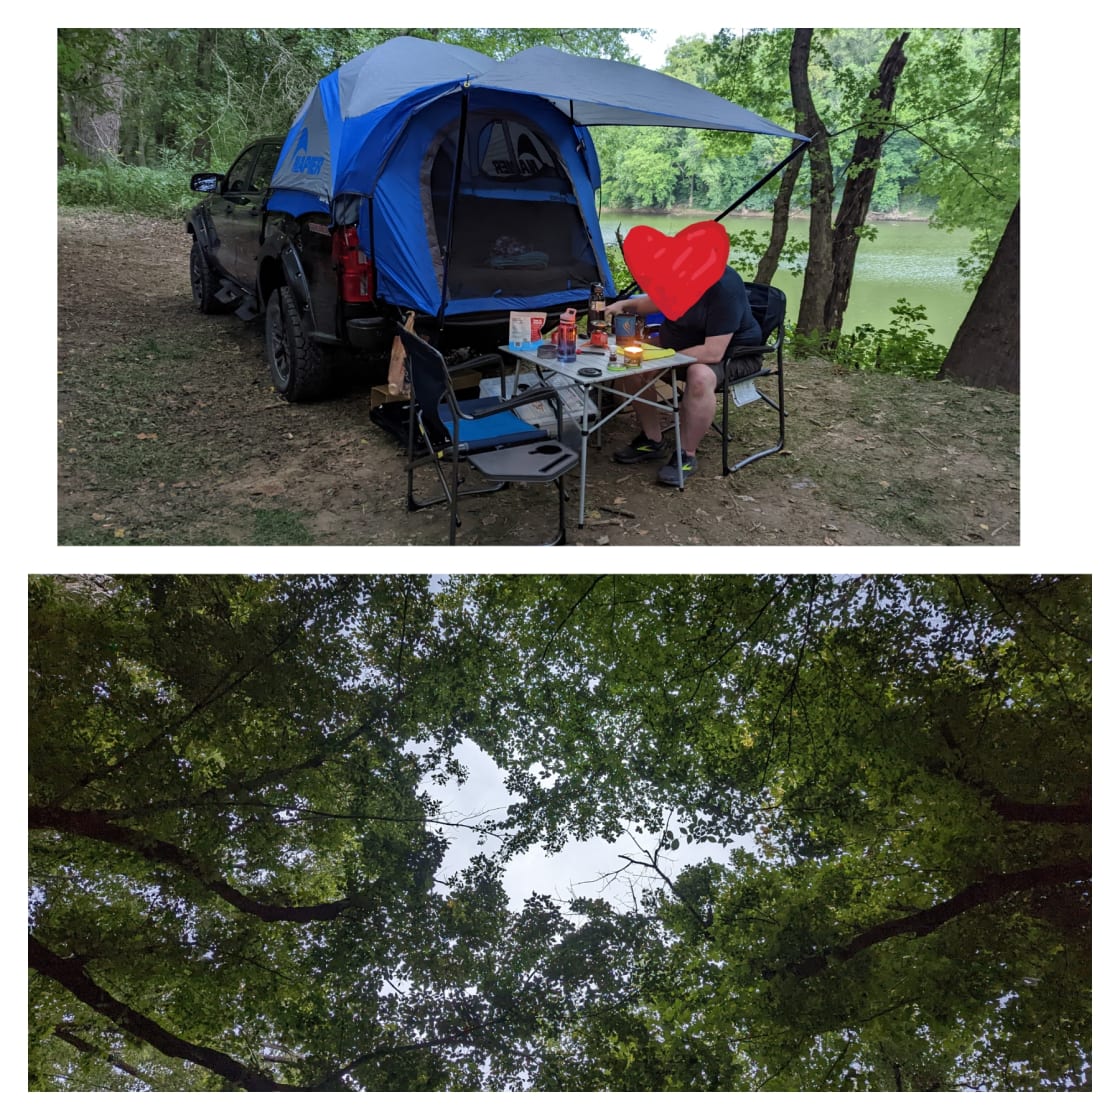 Tent camping in our midsize truck along the river. The view of the canopy above us. 